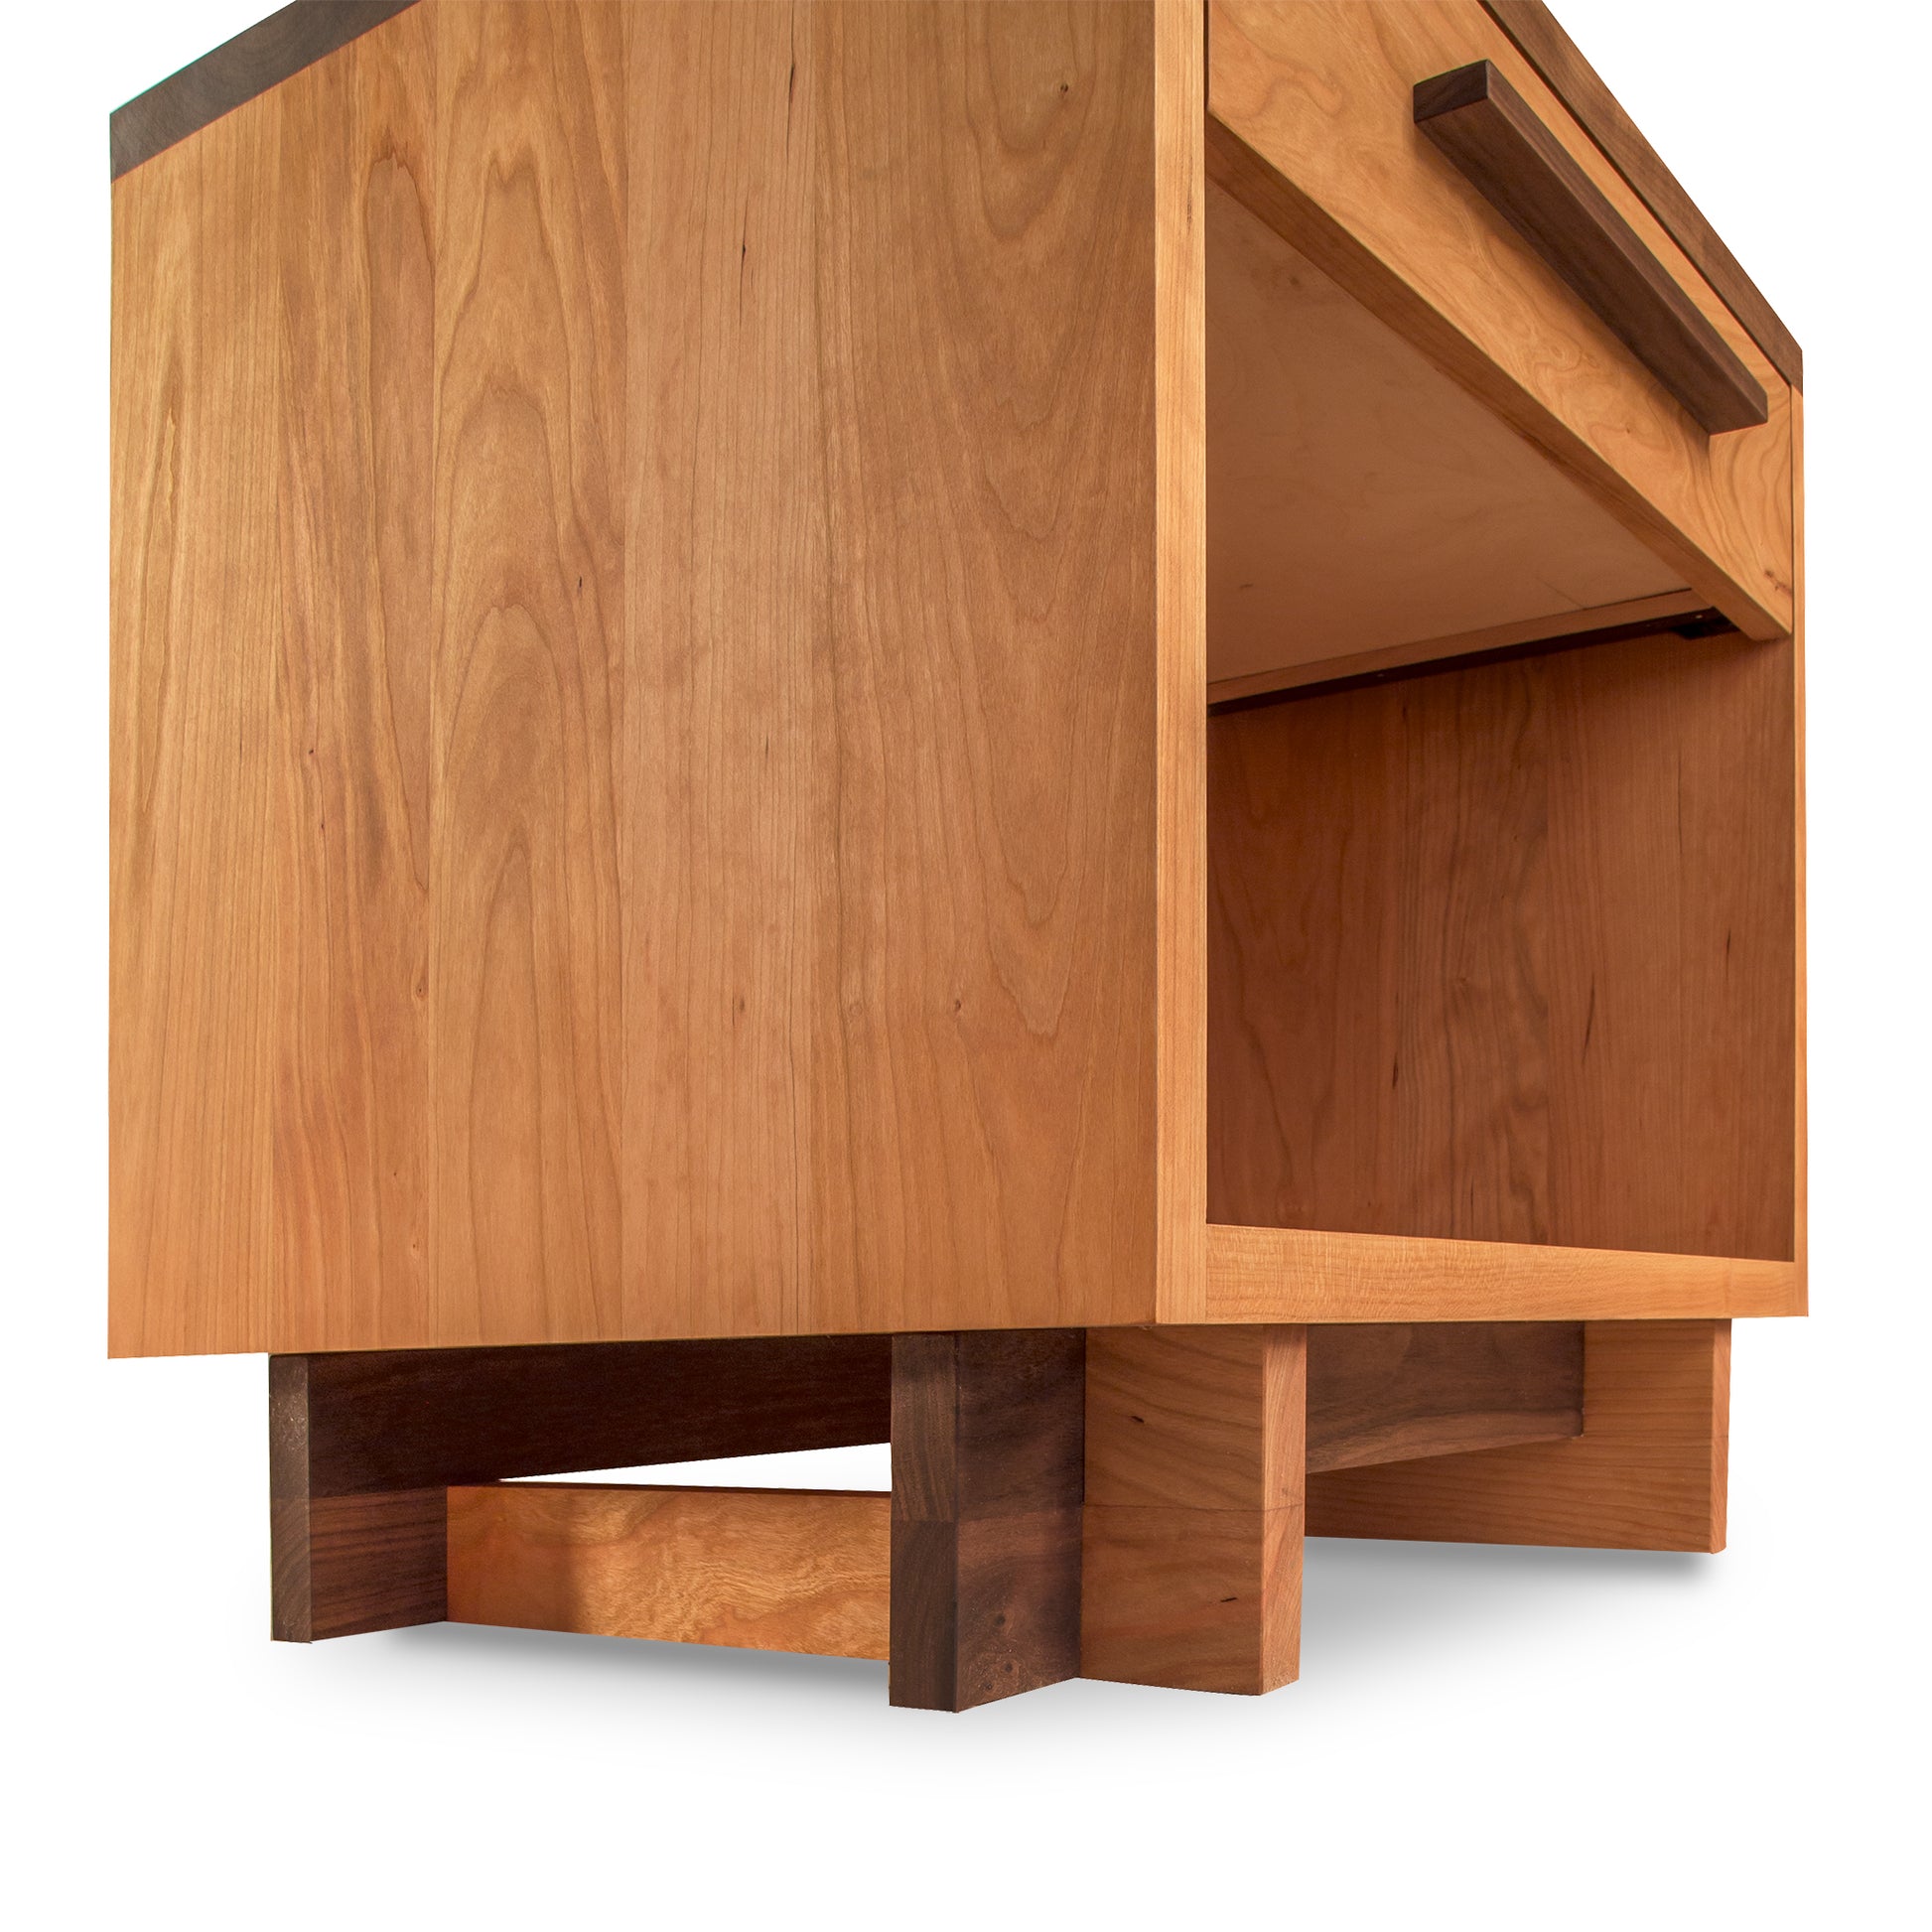 Close-up of a Modern American 1-Drawer Enclosed Shelf Wide Nightstand by Vermont Furniture Designs, with an open shelf, showing detailed grain texture and craftsmanship. The cabinet is elevated on short, solid legs and features a minimalist design.